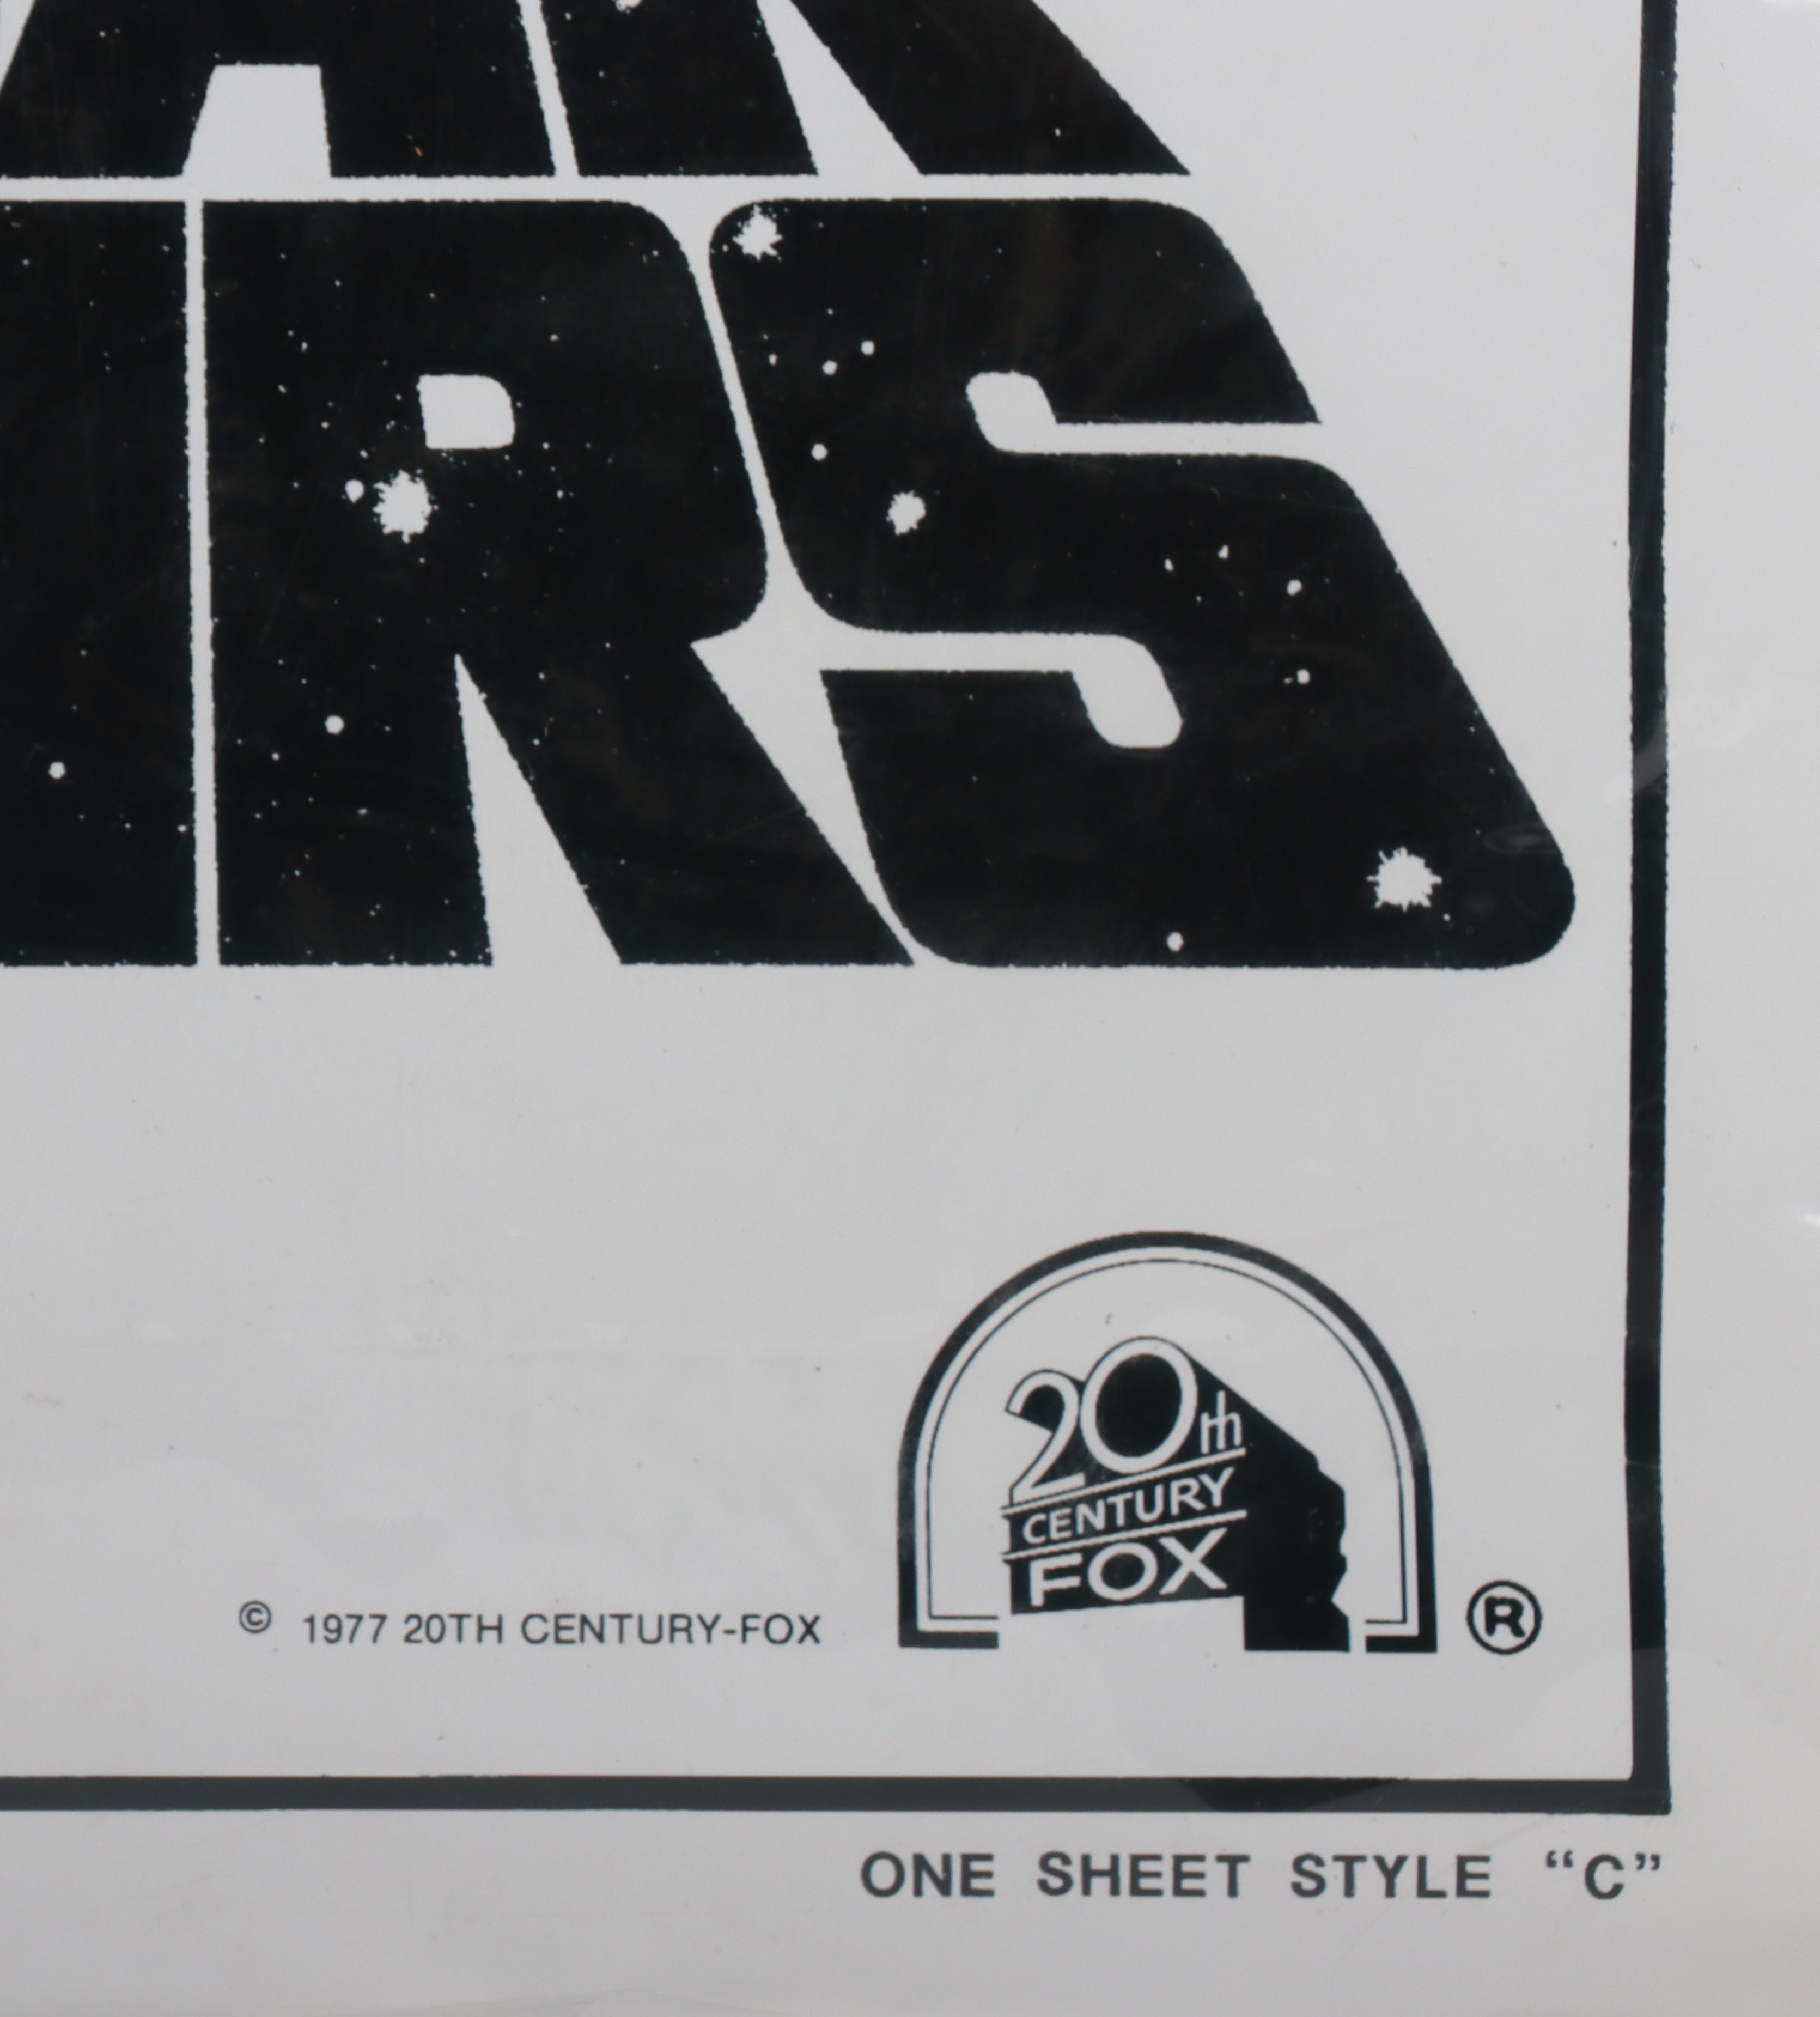 Star Wars 1993 Issue One sheet Style C Poster - Image 4 of 4